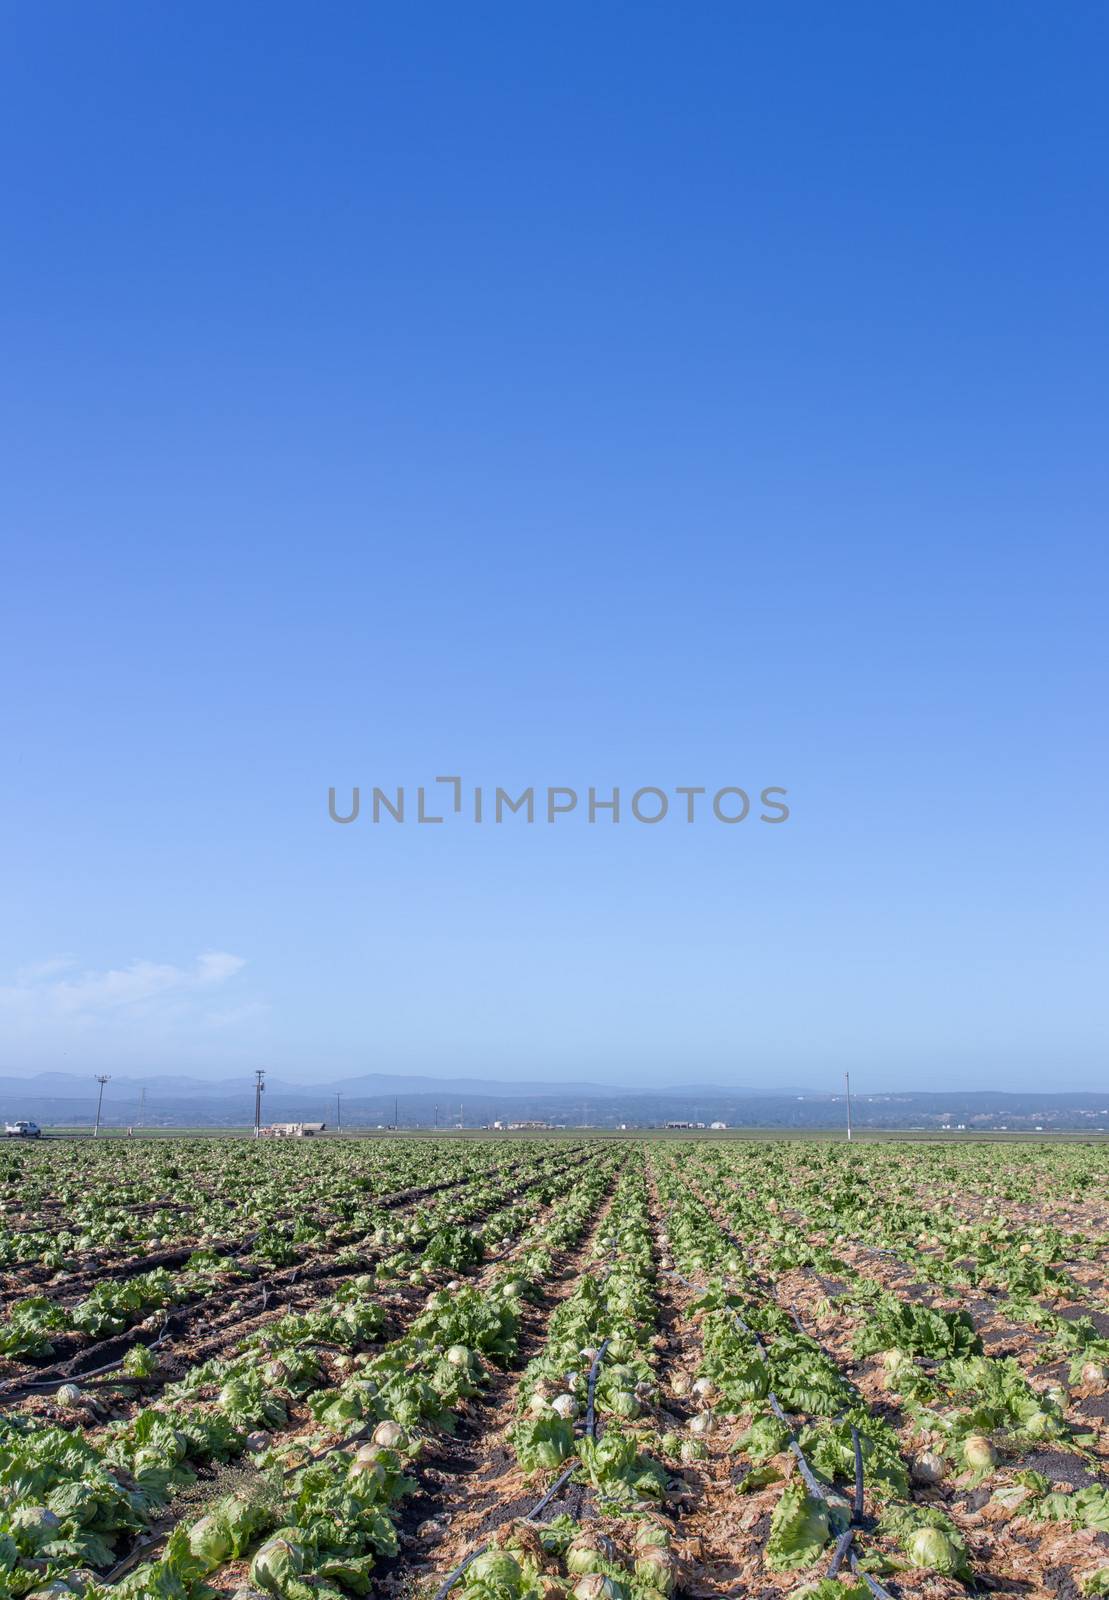 Harvested Lettuce Fields in Salinas Valley by wolterk